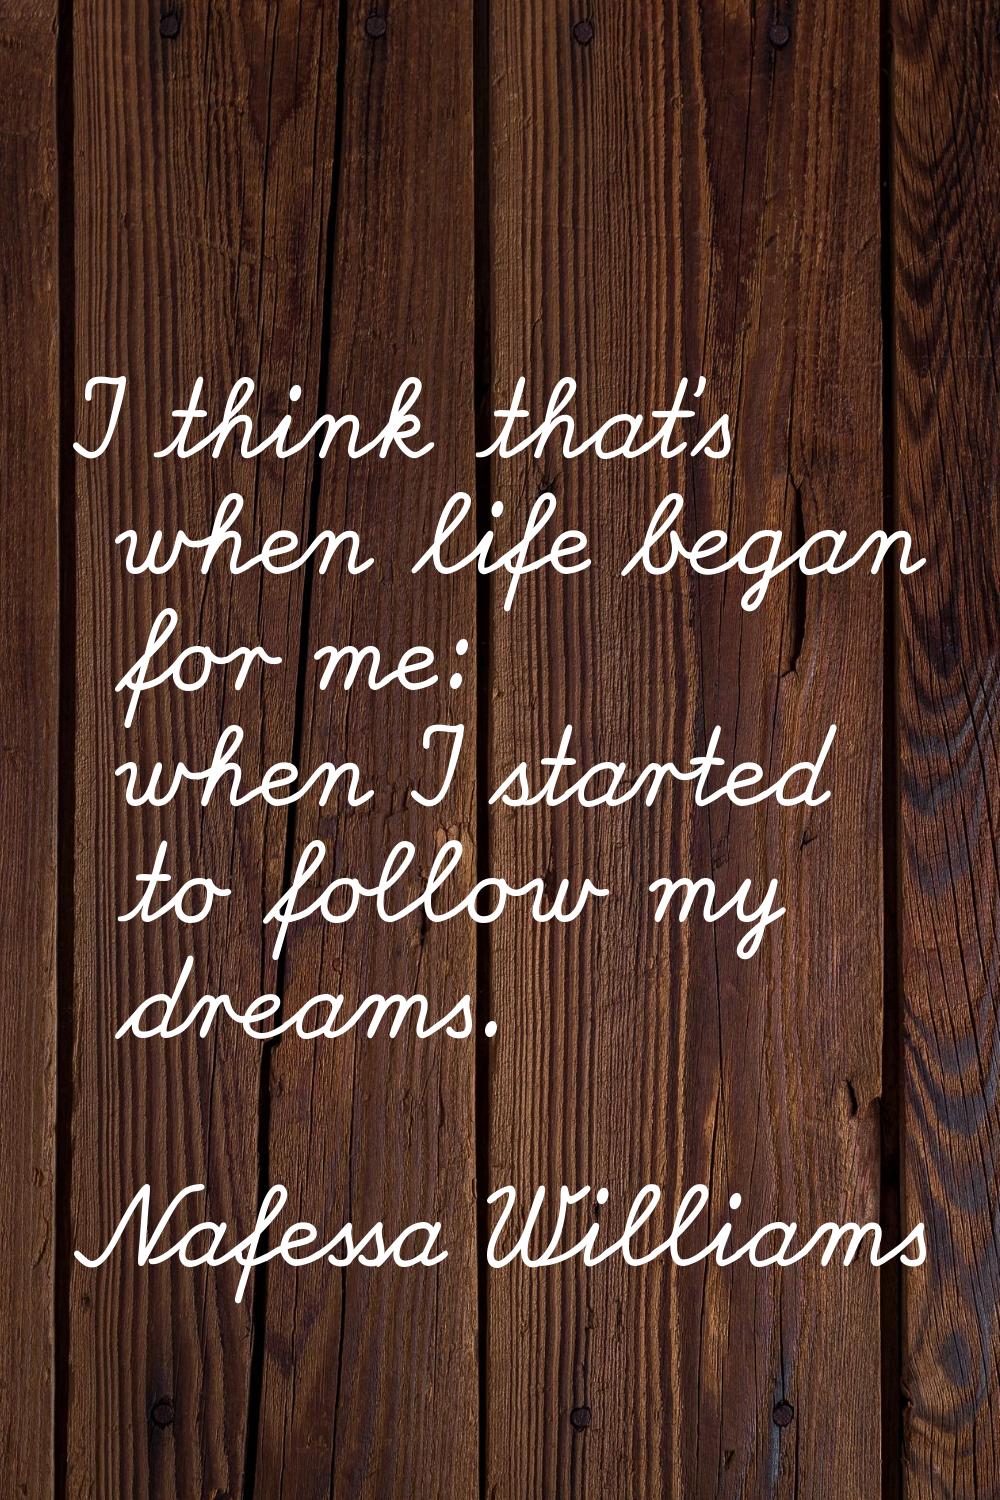 I think that's when life began for me: when I started to follow my dreams.